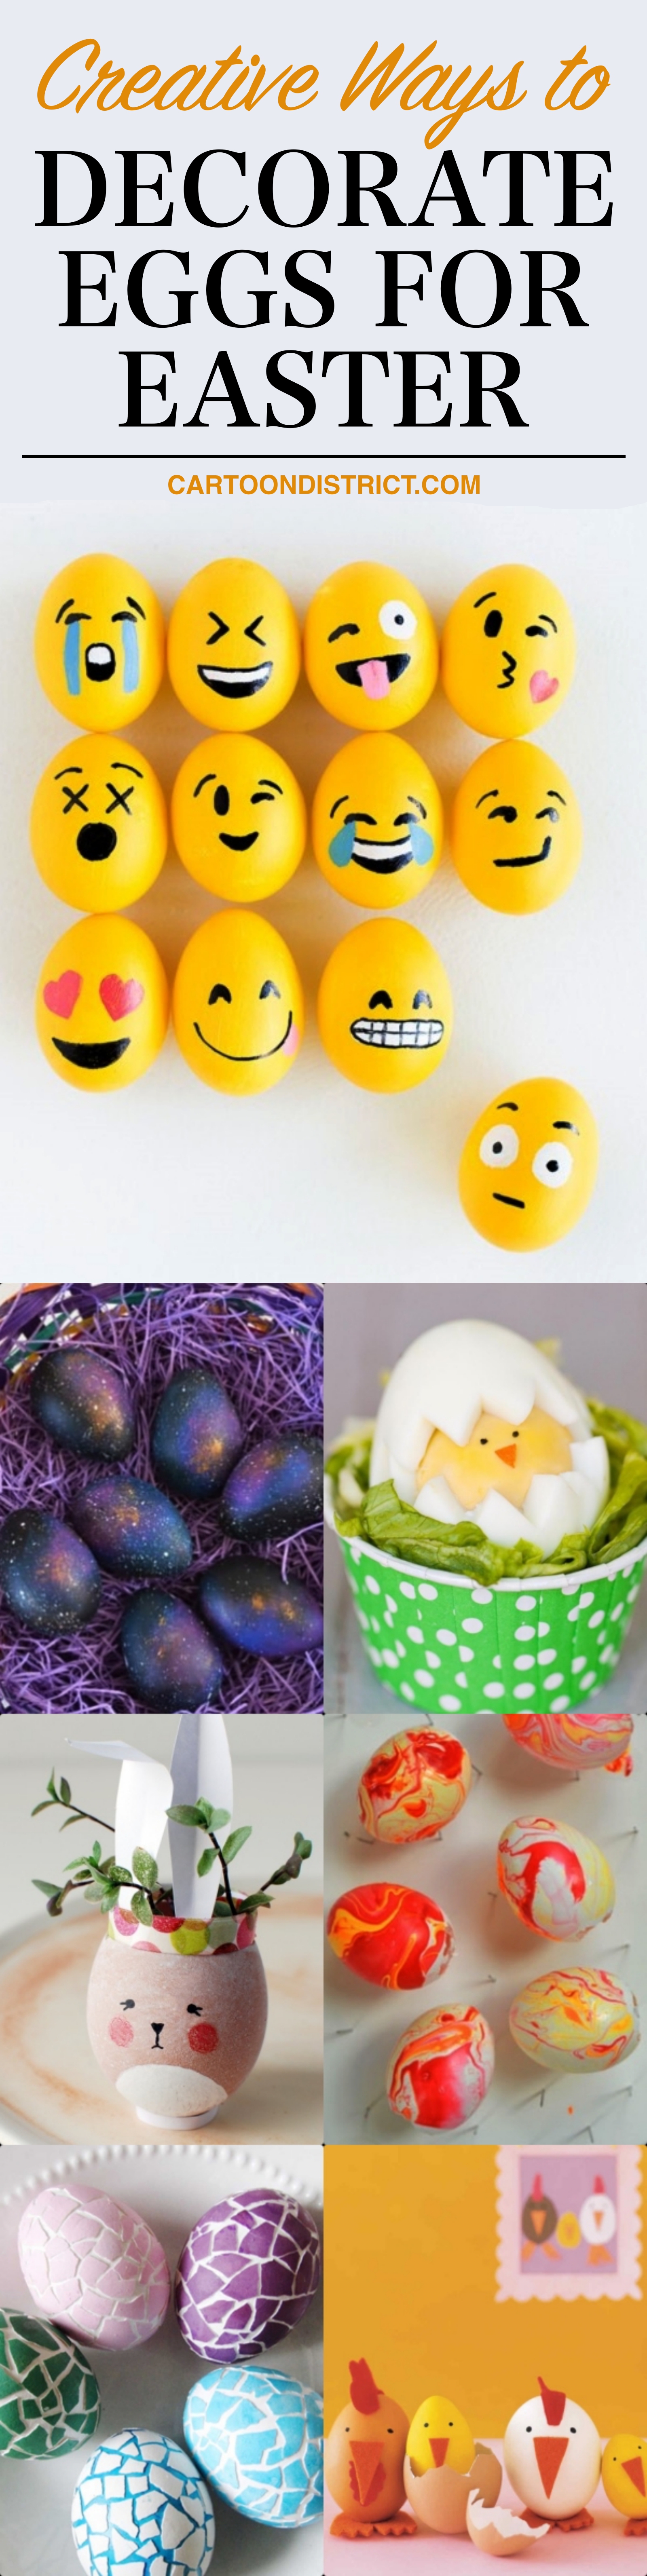 Creative Ways to Decorate Eggs for Easter